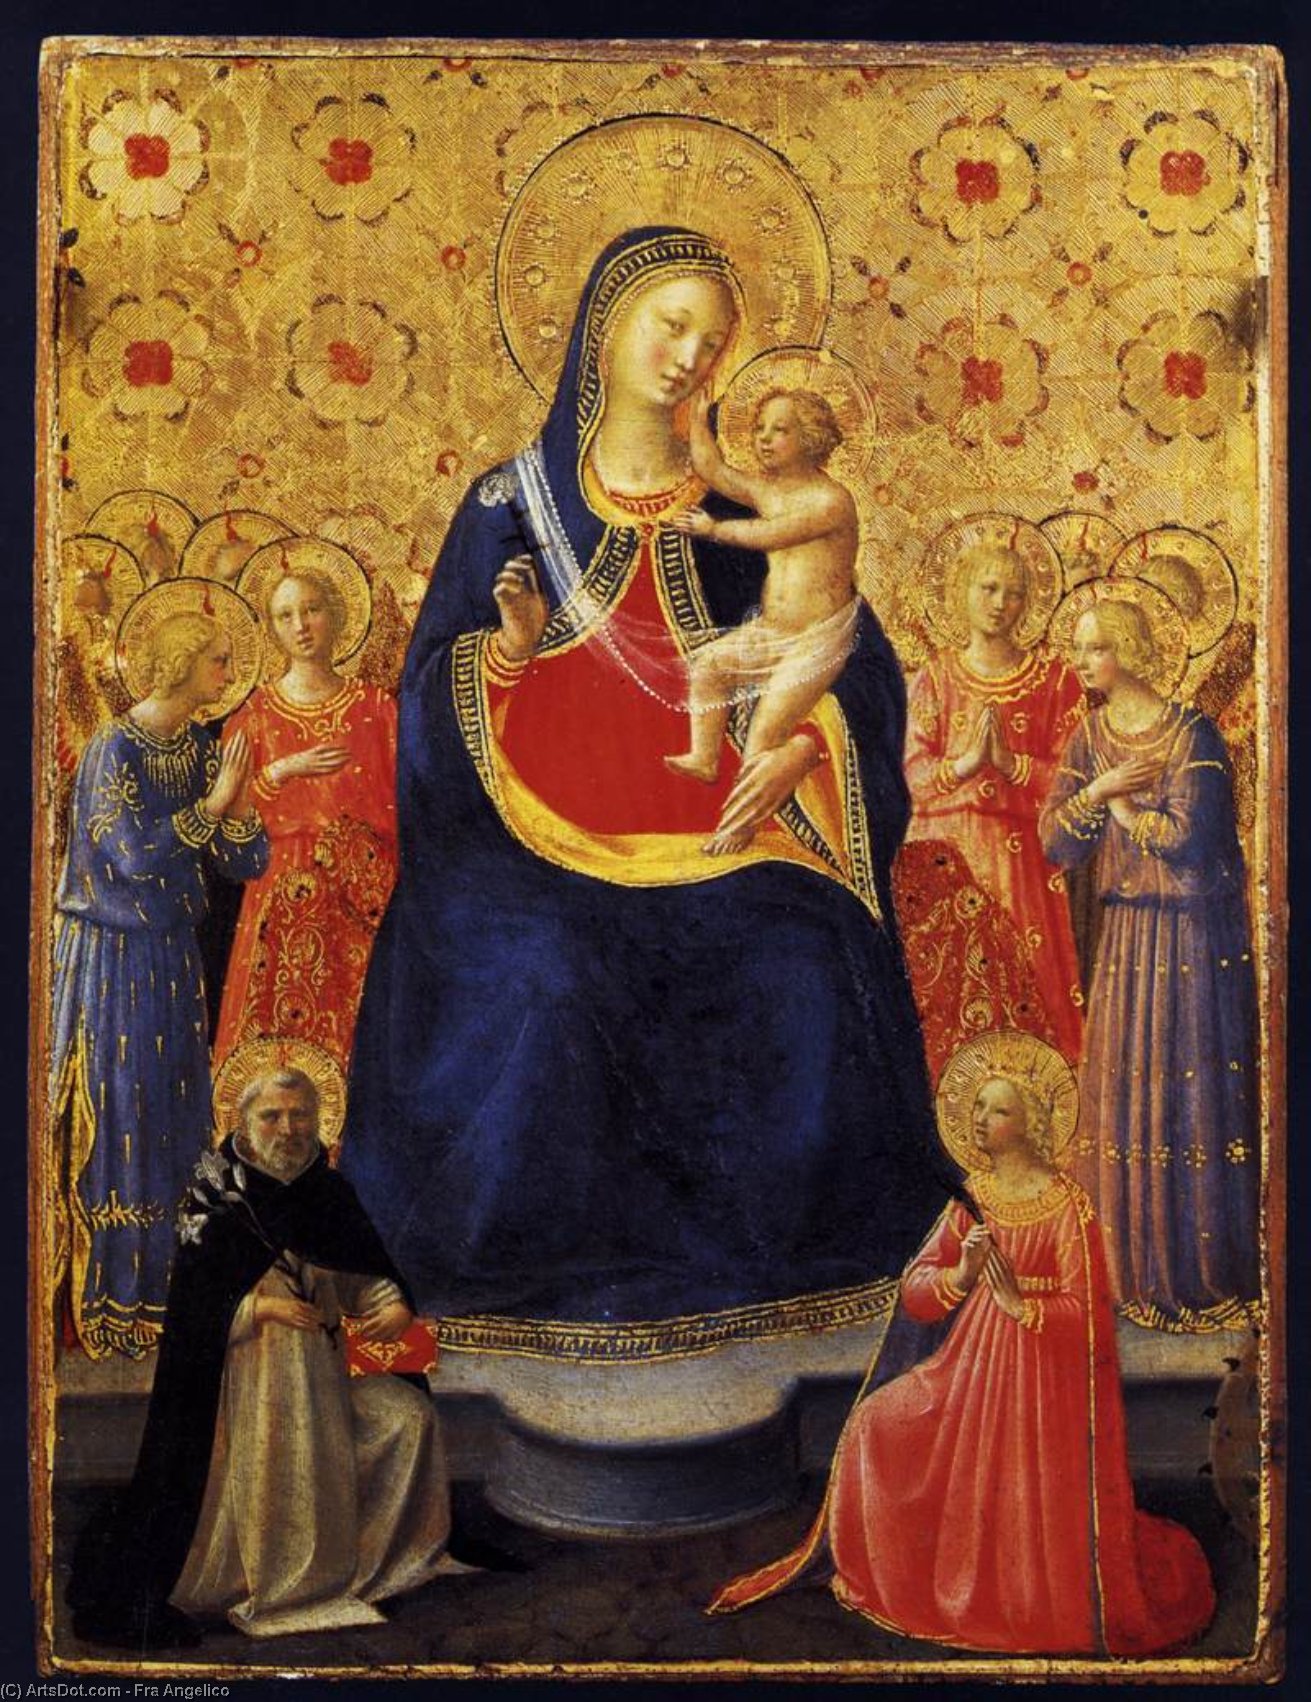 WikiOO.org - Güzel Sanatlar Ansiklopedisi - Resim, Resimler Fra Angelico - Virgin and Child with Sts Dominic and Catherine of Alexandria